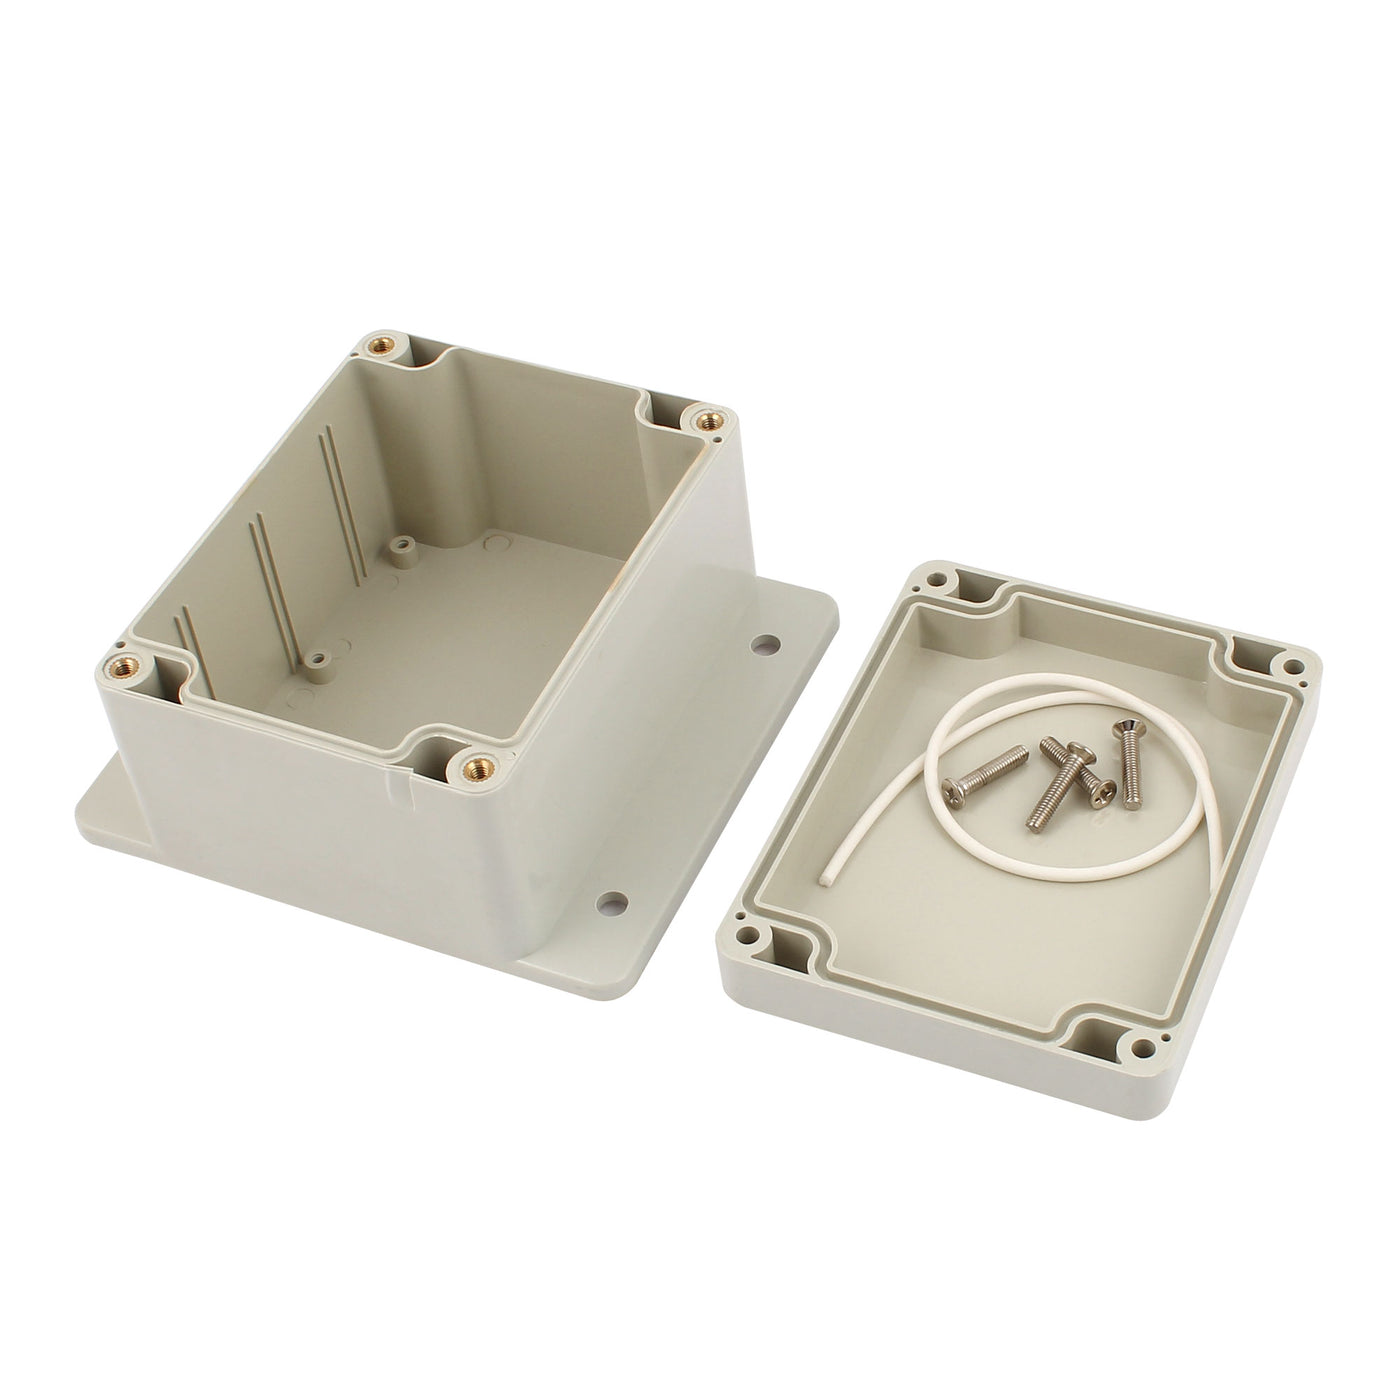 Uxcell Uxcell 115mm x 90mm x 70mm Plastic Dustproof IP65 Sealed DIY Joint Electrical Junction Box